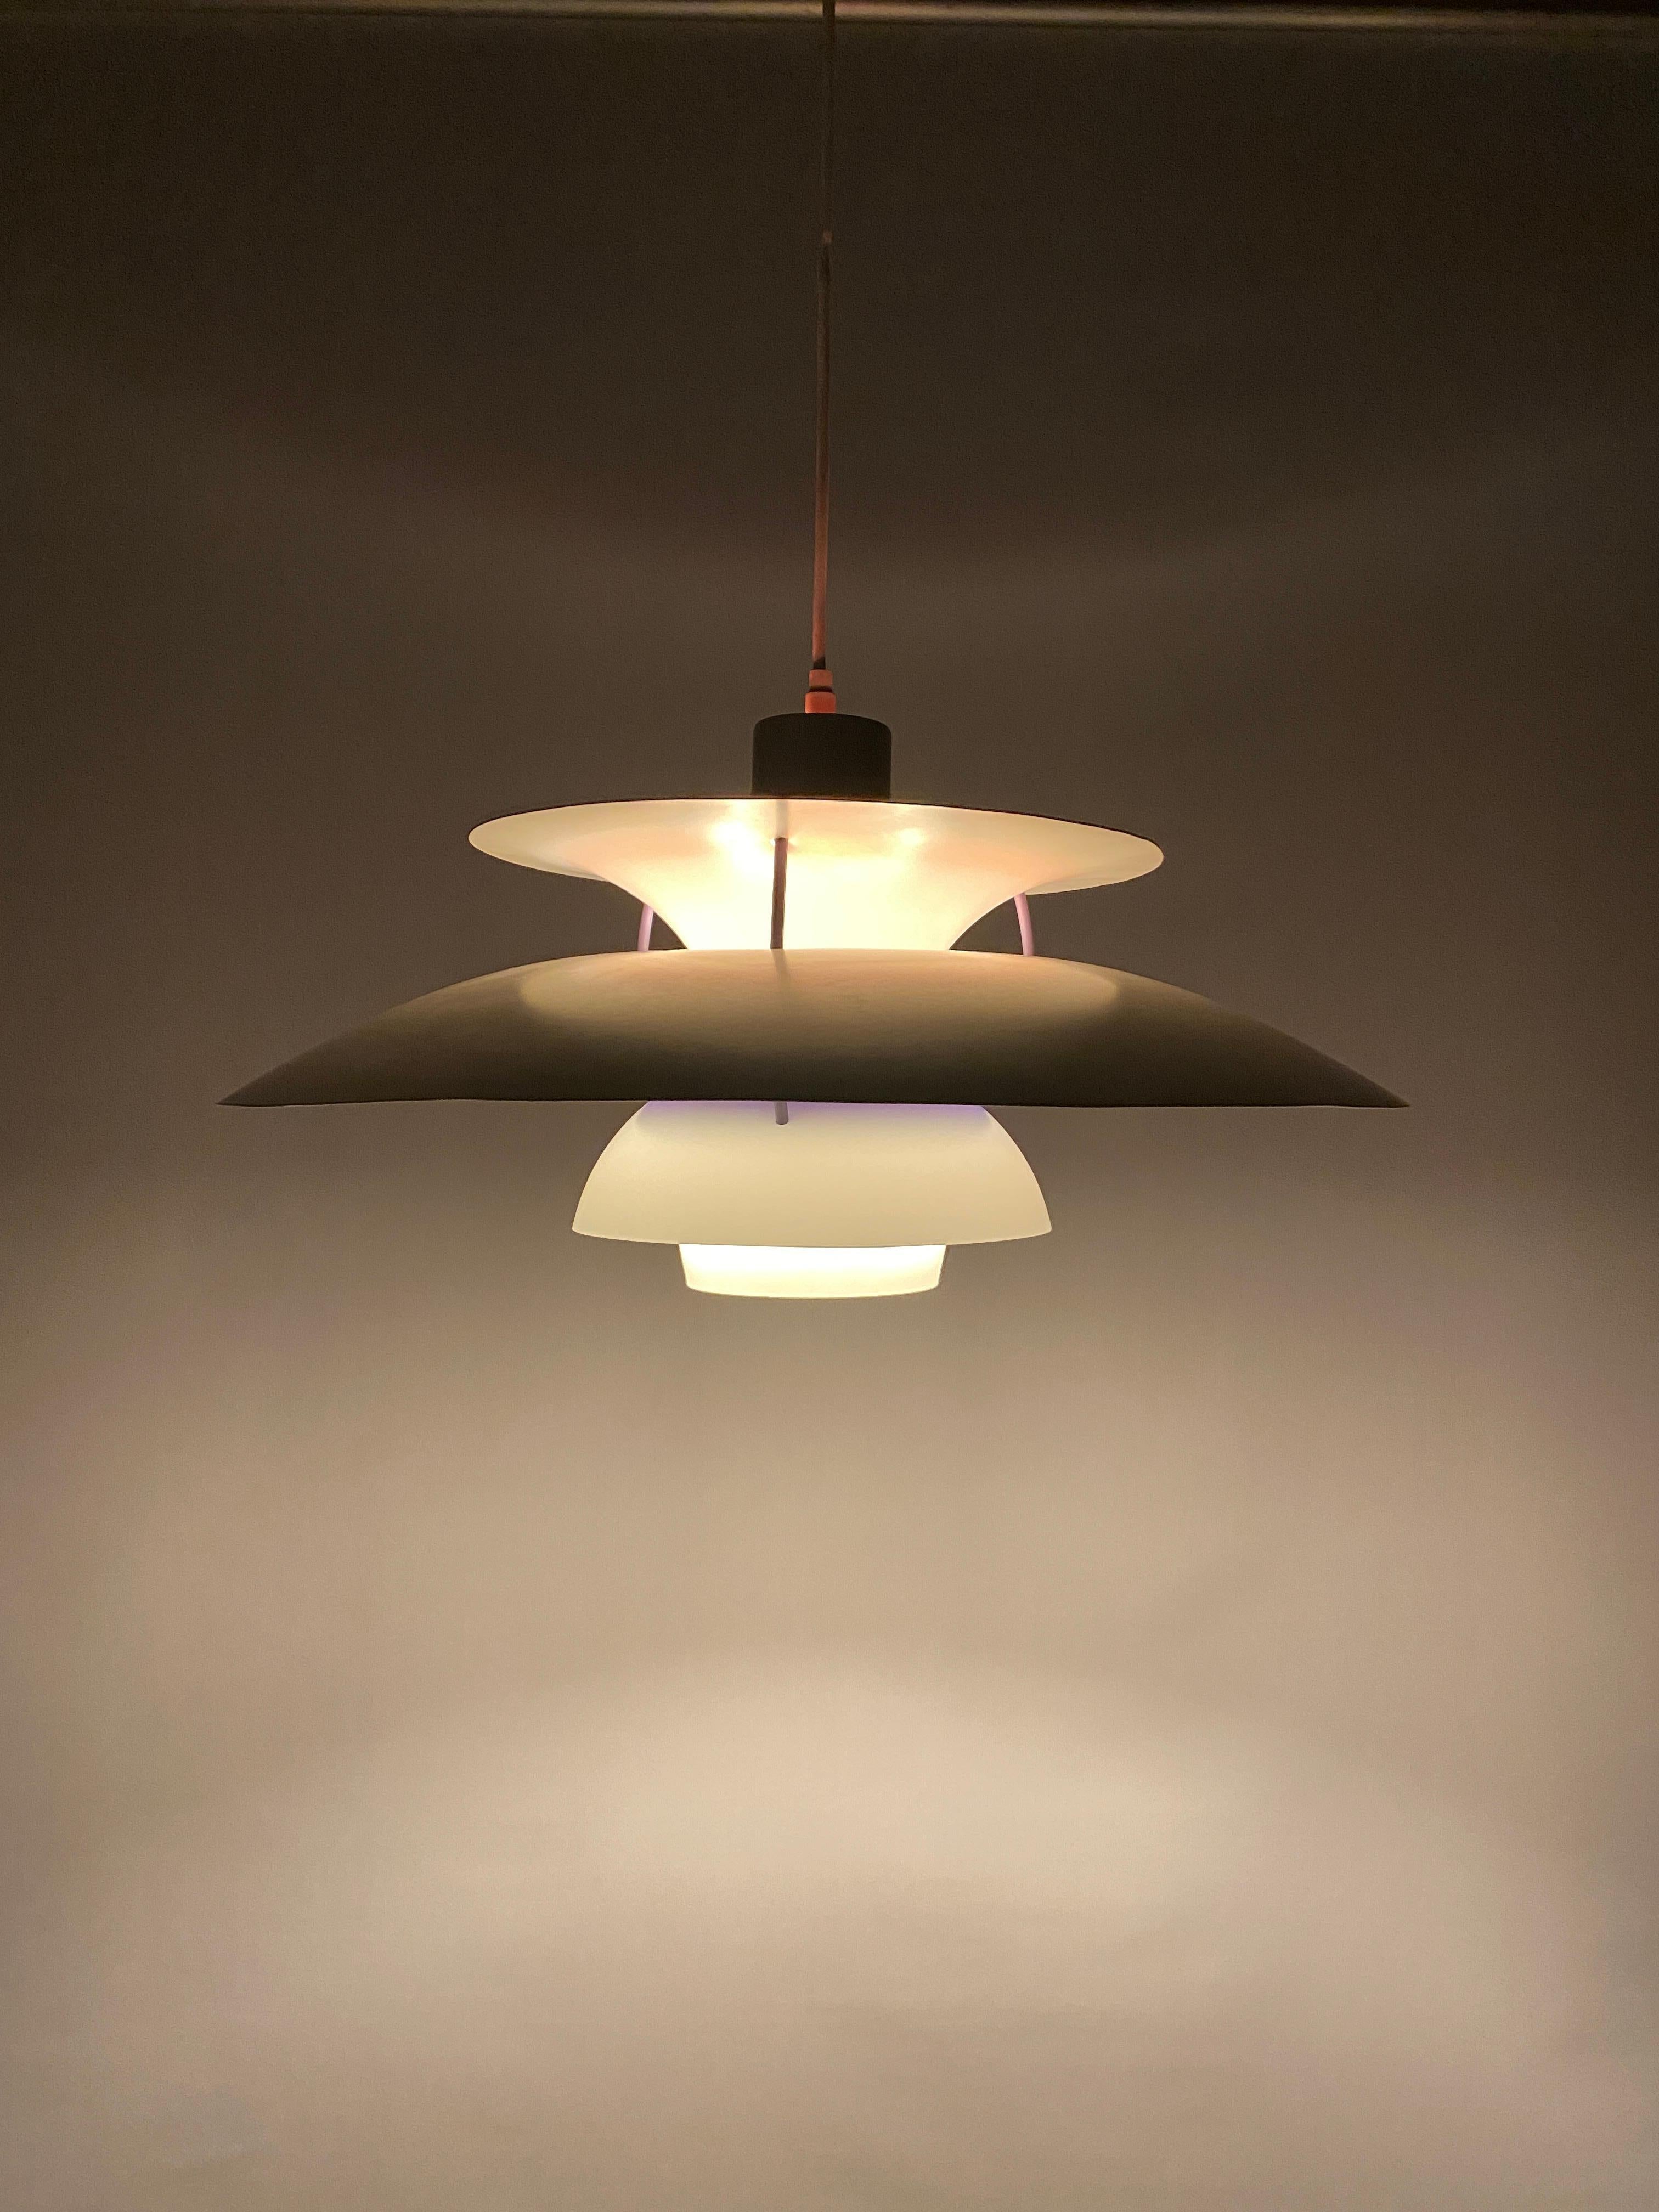 White and Purple PH5 Pendant Light by Poul Henningsen for Louis Poulsen 1970 For Sale 8